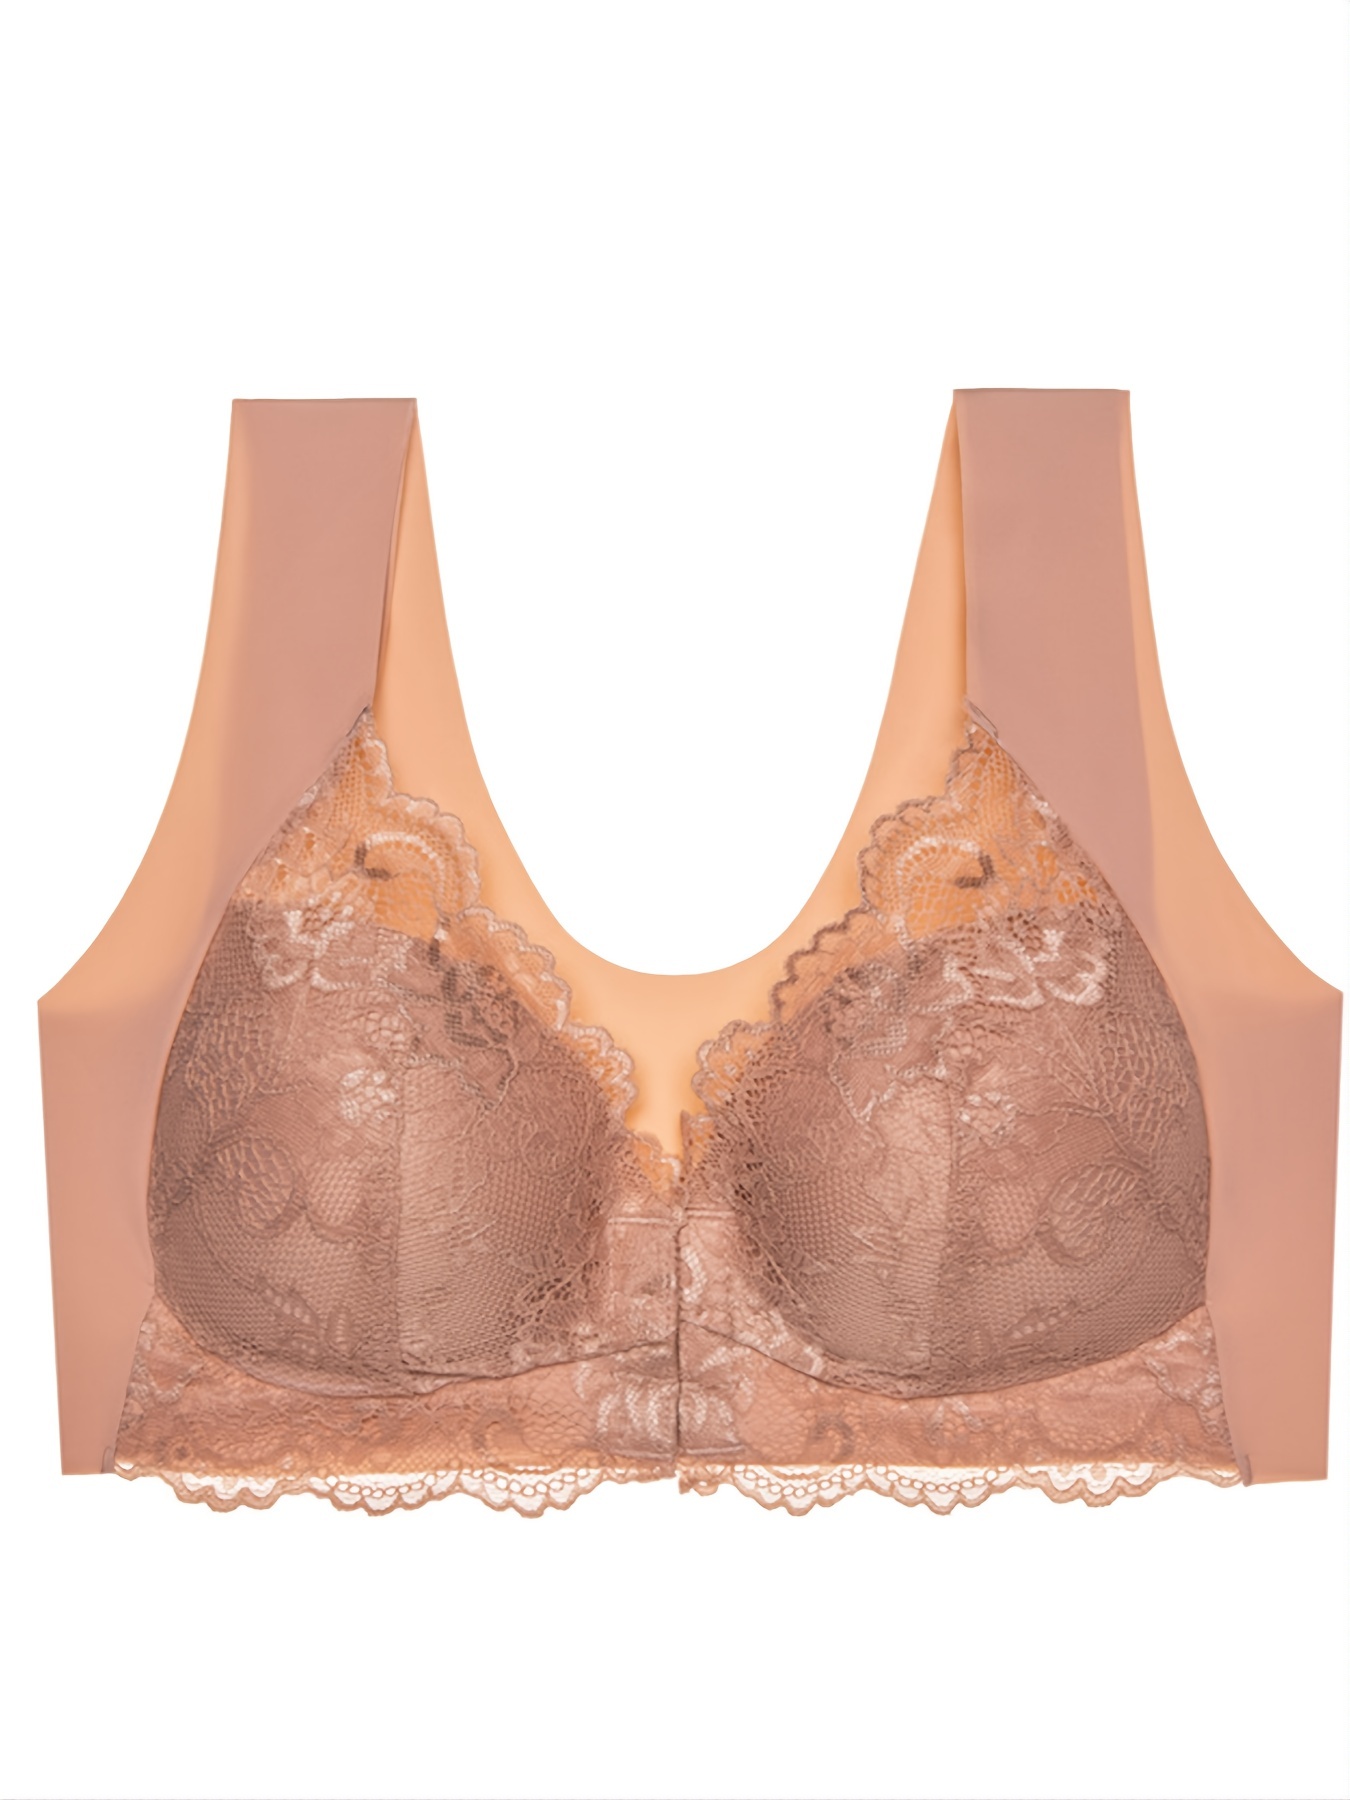 Front Closure Lace Bras for Women Seamless Wireless Nepal